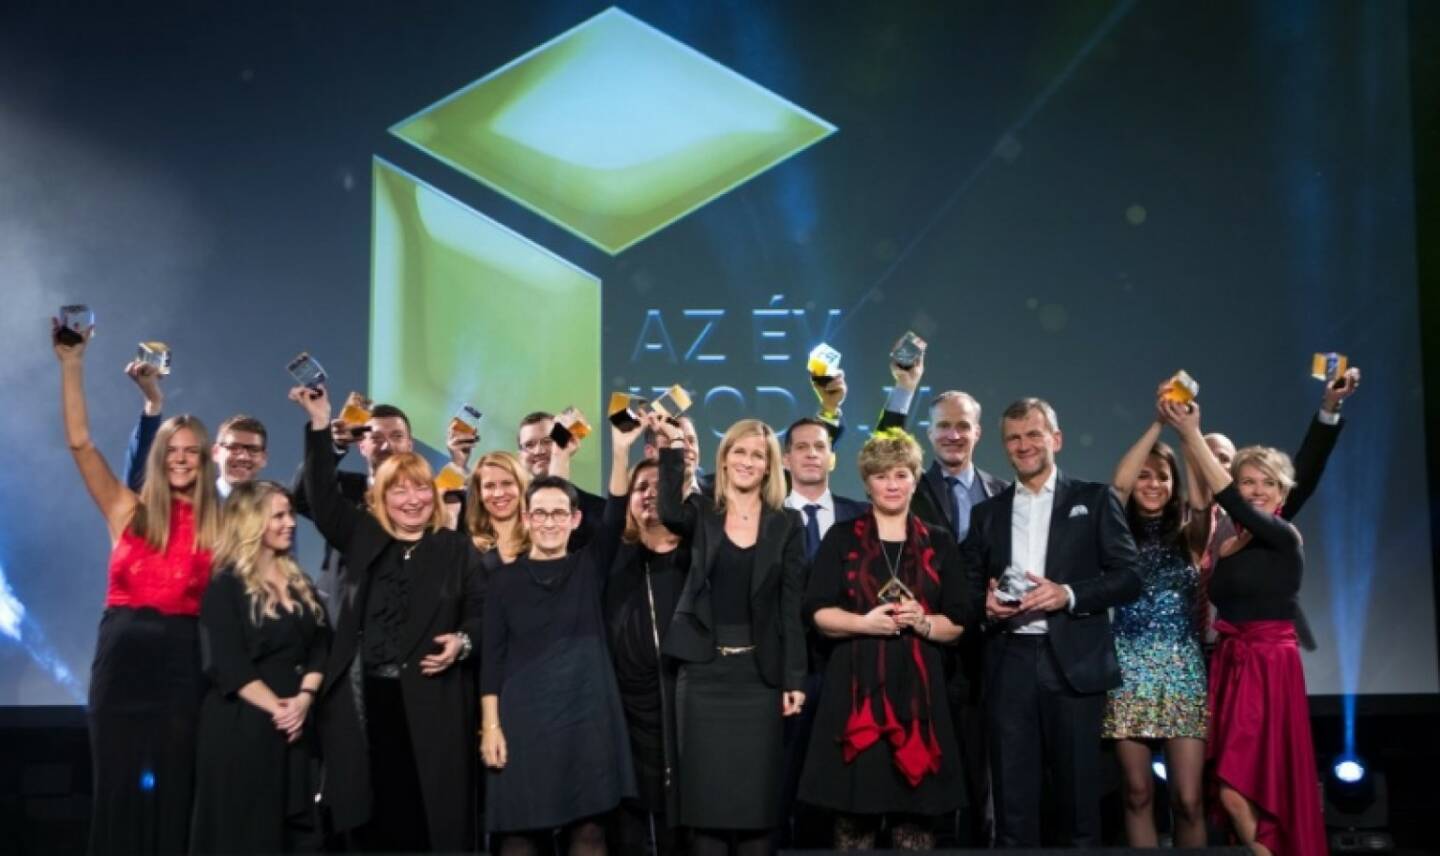 Immofinanz myhive office concept repeatedly wins international Awards
https://lnkd.in/grFhU4Y